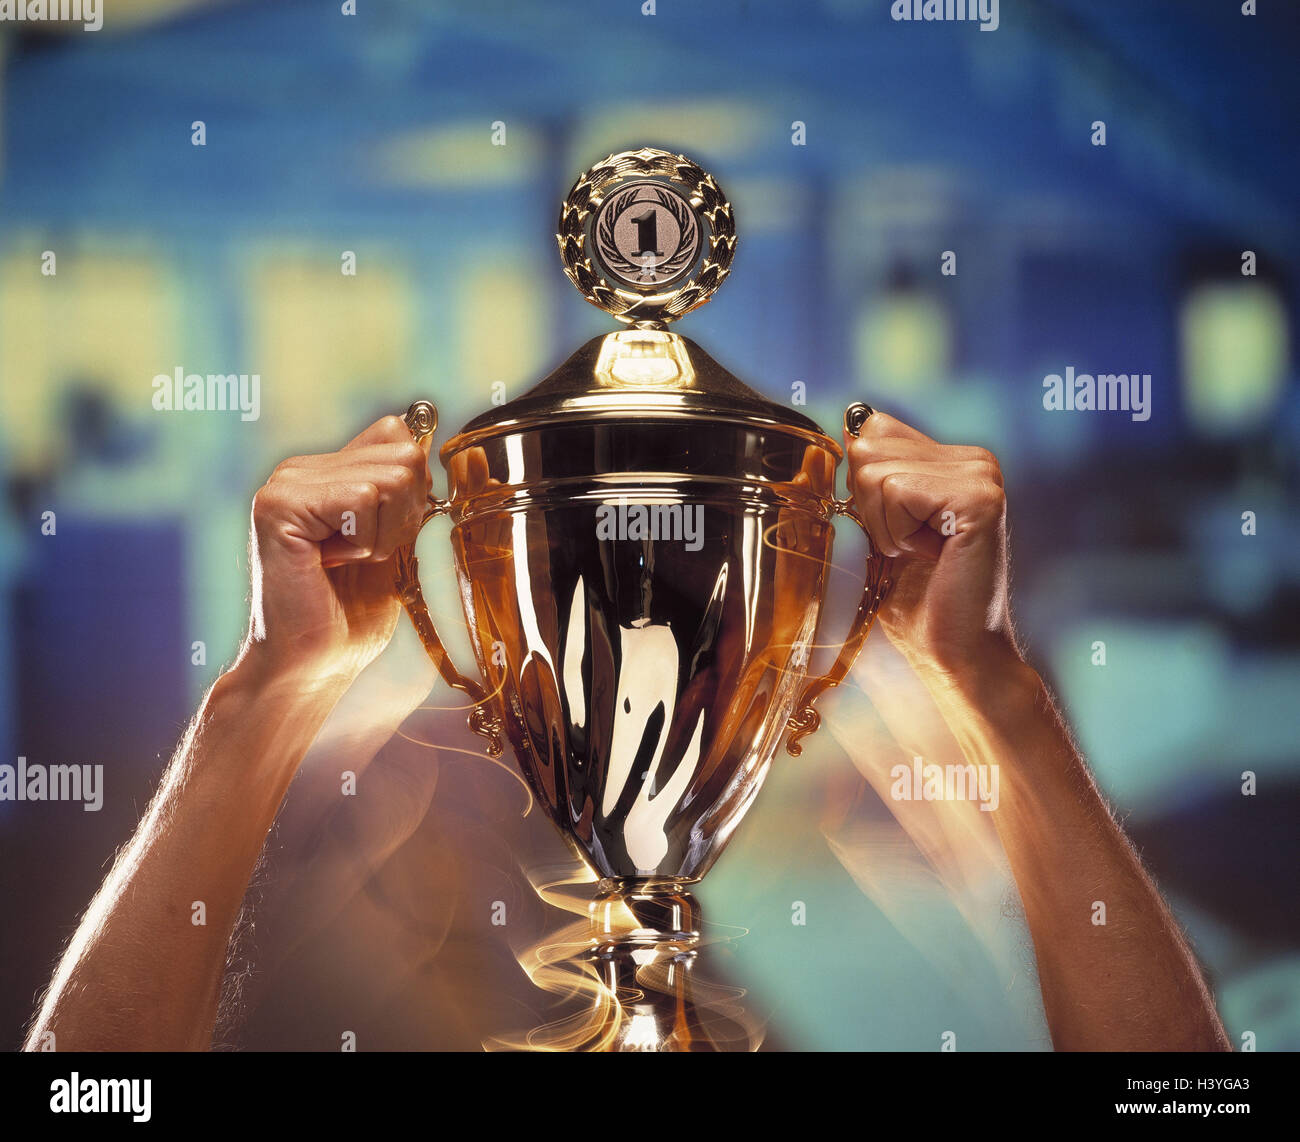 Man, detail, hands, cup, hold, manipulated, blur first, winner, winner, price, victory price, sports price, award, sports award, trophy, victory trophy, product photography, Still life Stock Photo